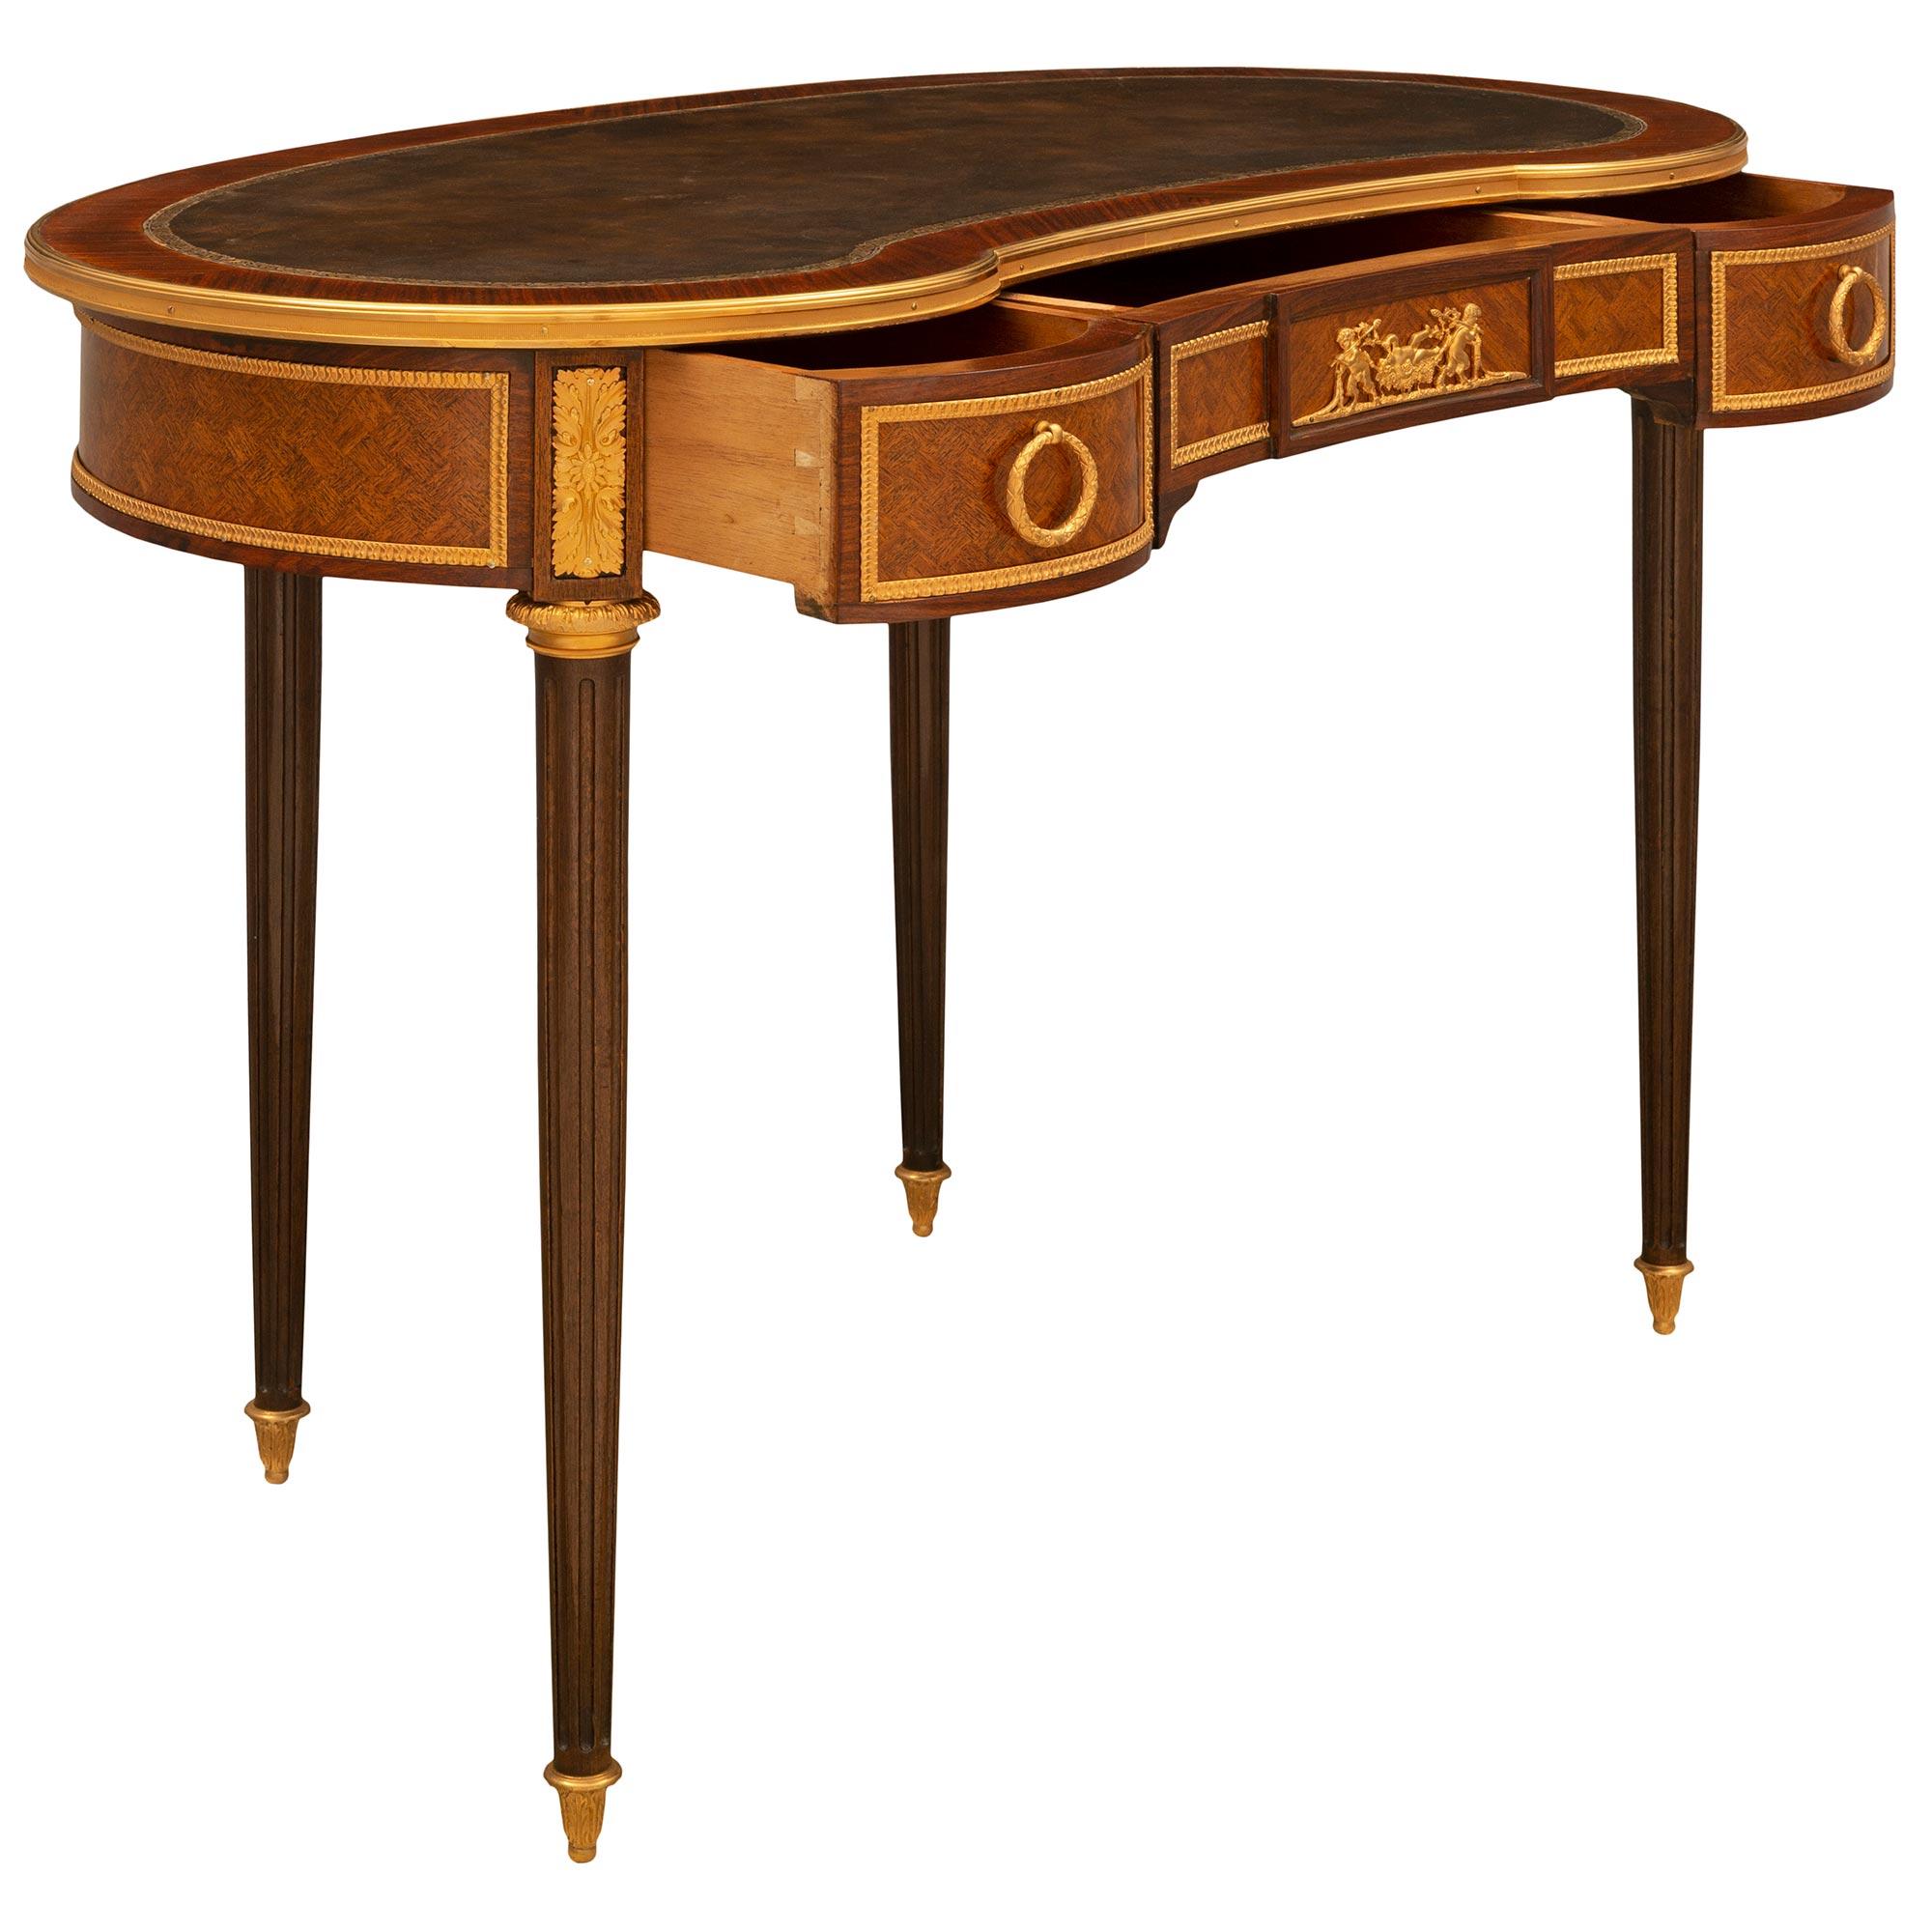 Ormolu French 19th Century Tulipwood Parquetry Desk, Attributed to Linke For Sale